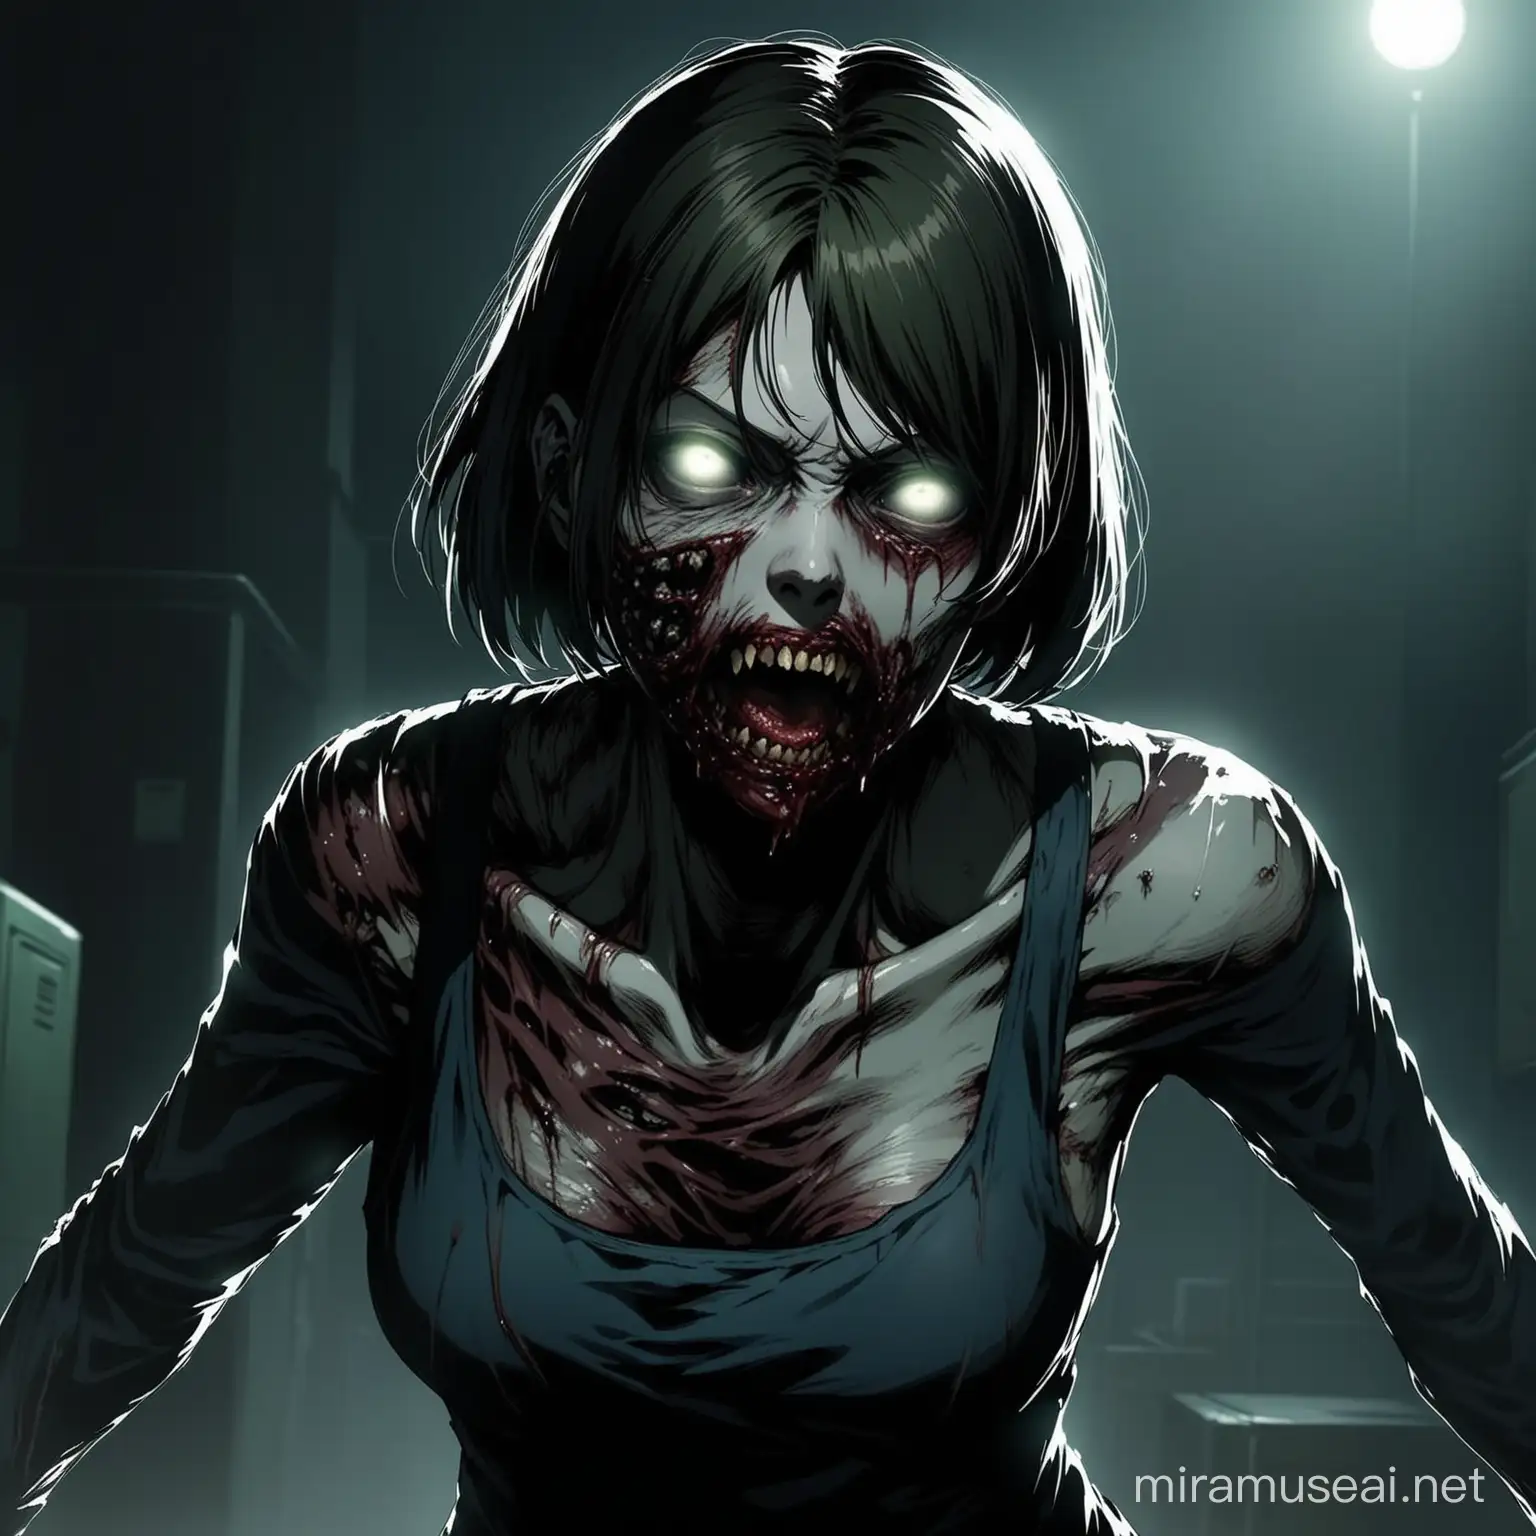 Human turning into a zombie from resident evil 2